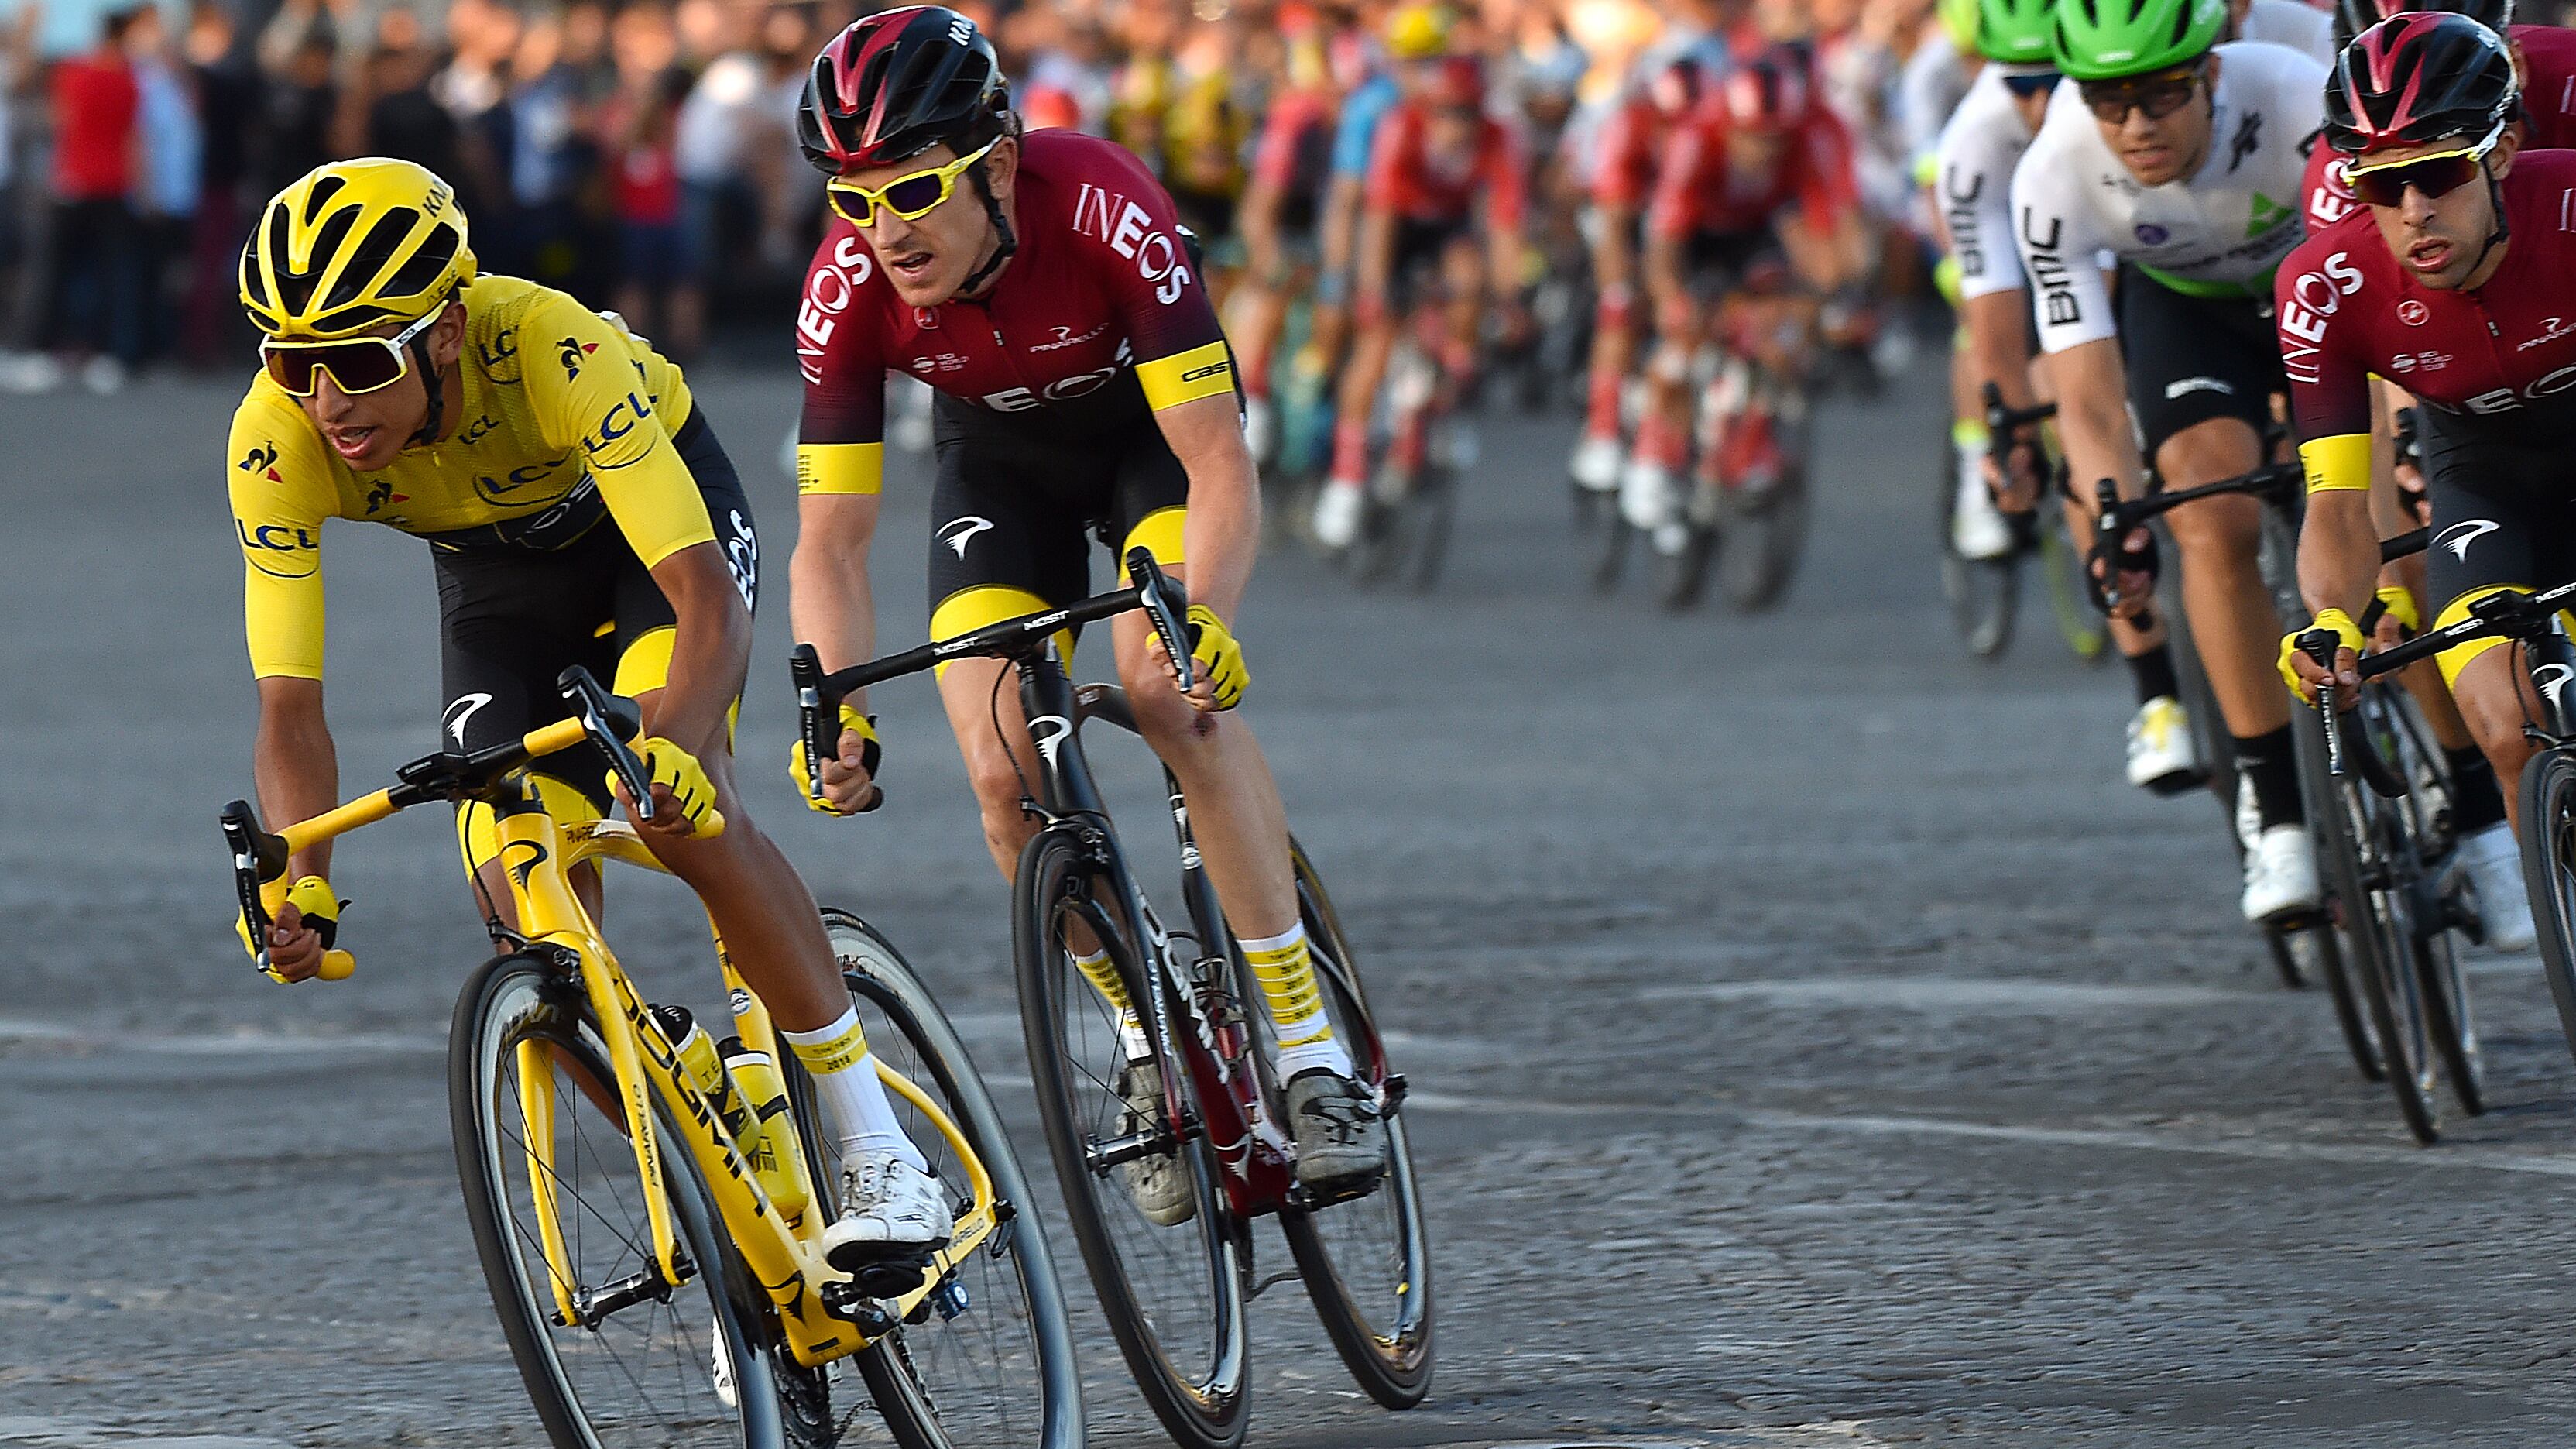 A shot from the Tour de France stage 21 in 2019, a cyclist in a yellow jacket and two cyclists in maroon jackets